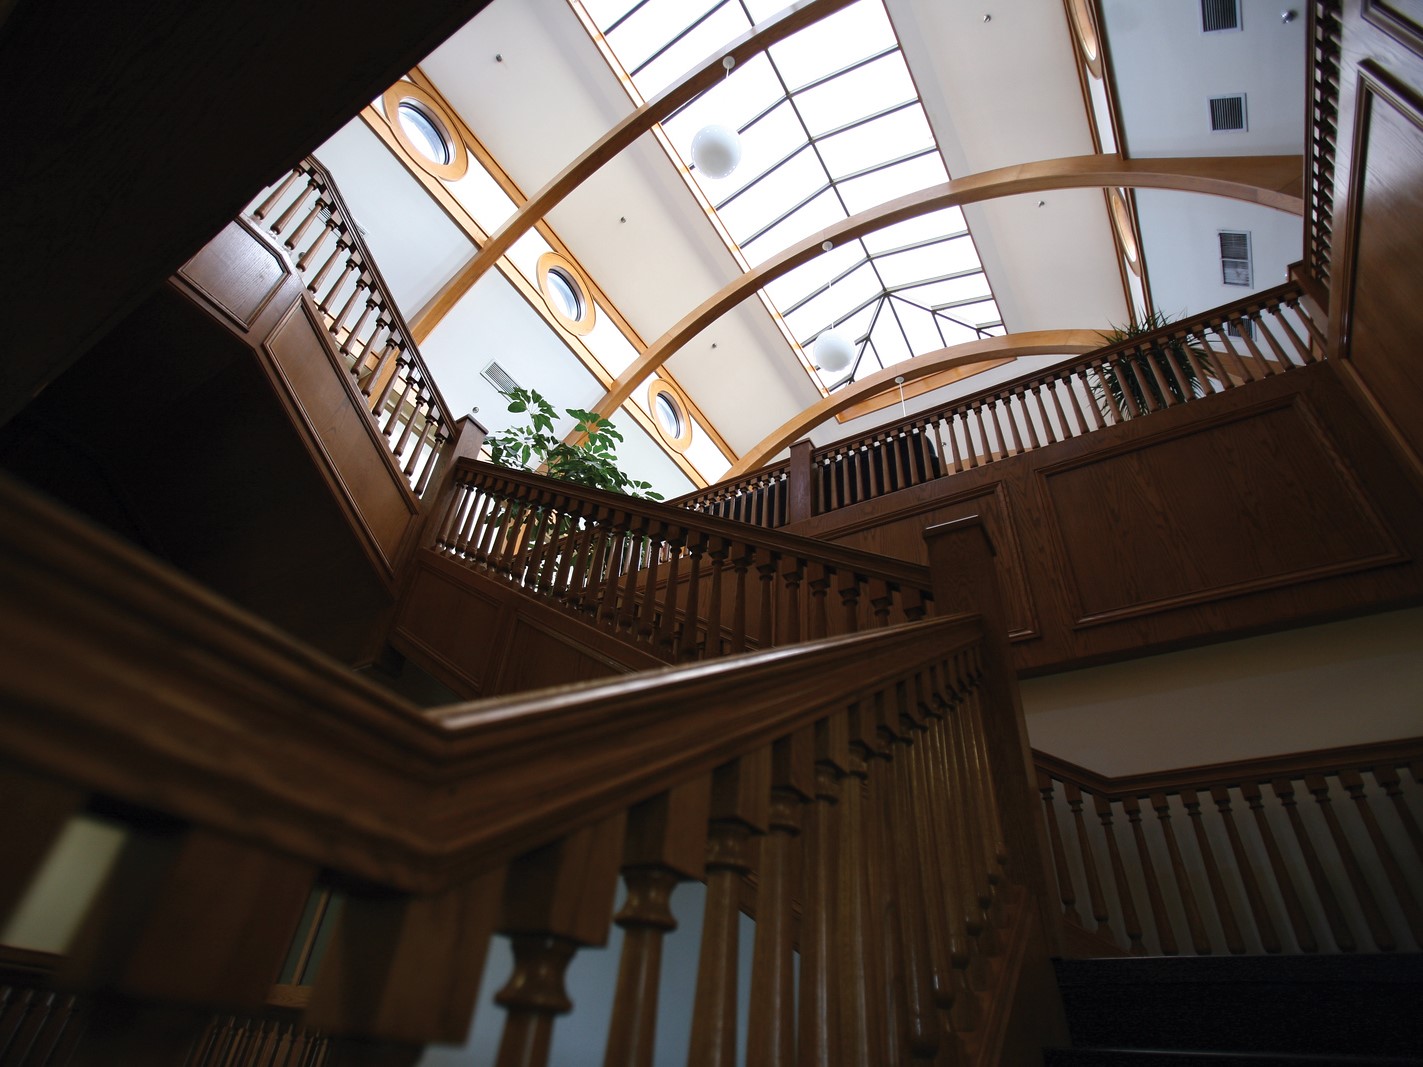 The iconic stairwell and ceiling windows in Carroll Science, which houses the Department of English at Baylor University